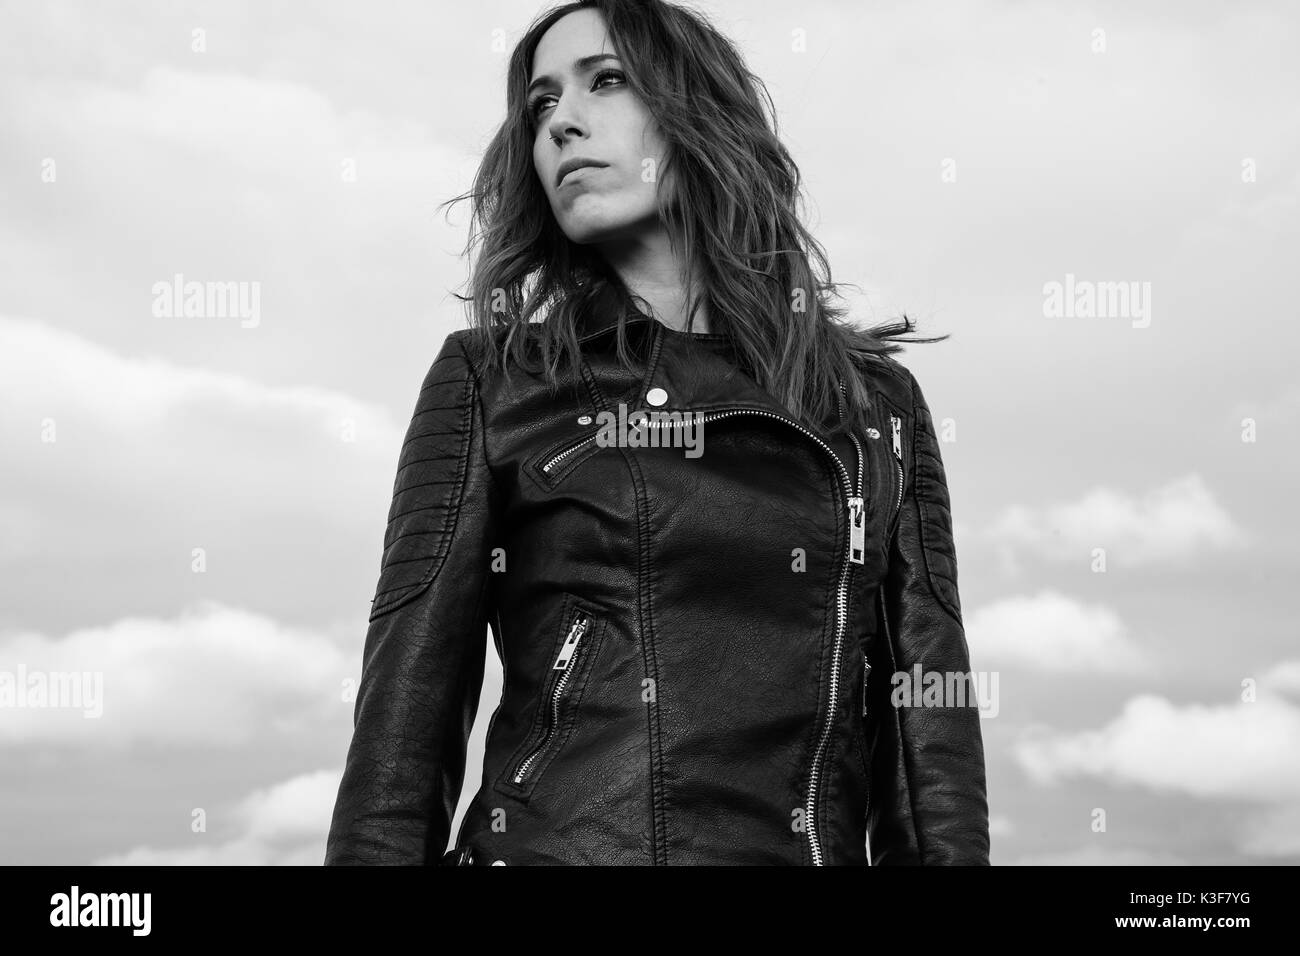 Waist-Up Portrait of Young Adult Woman in Black Leather Jacket Stock Photo